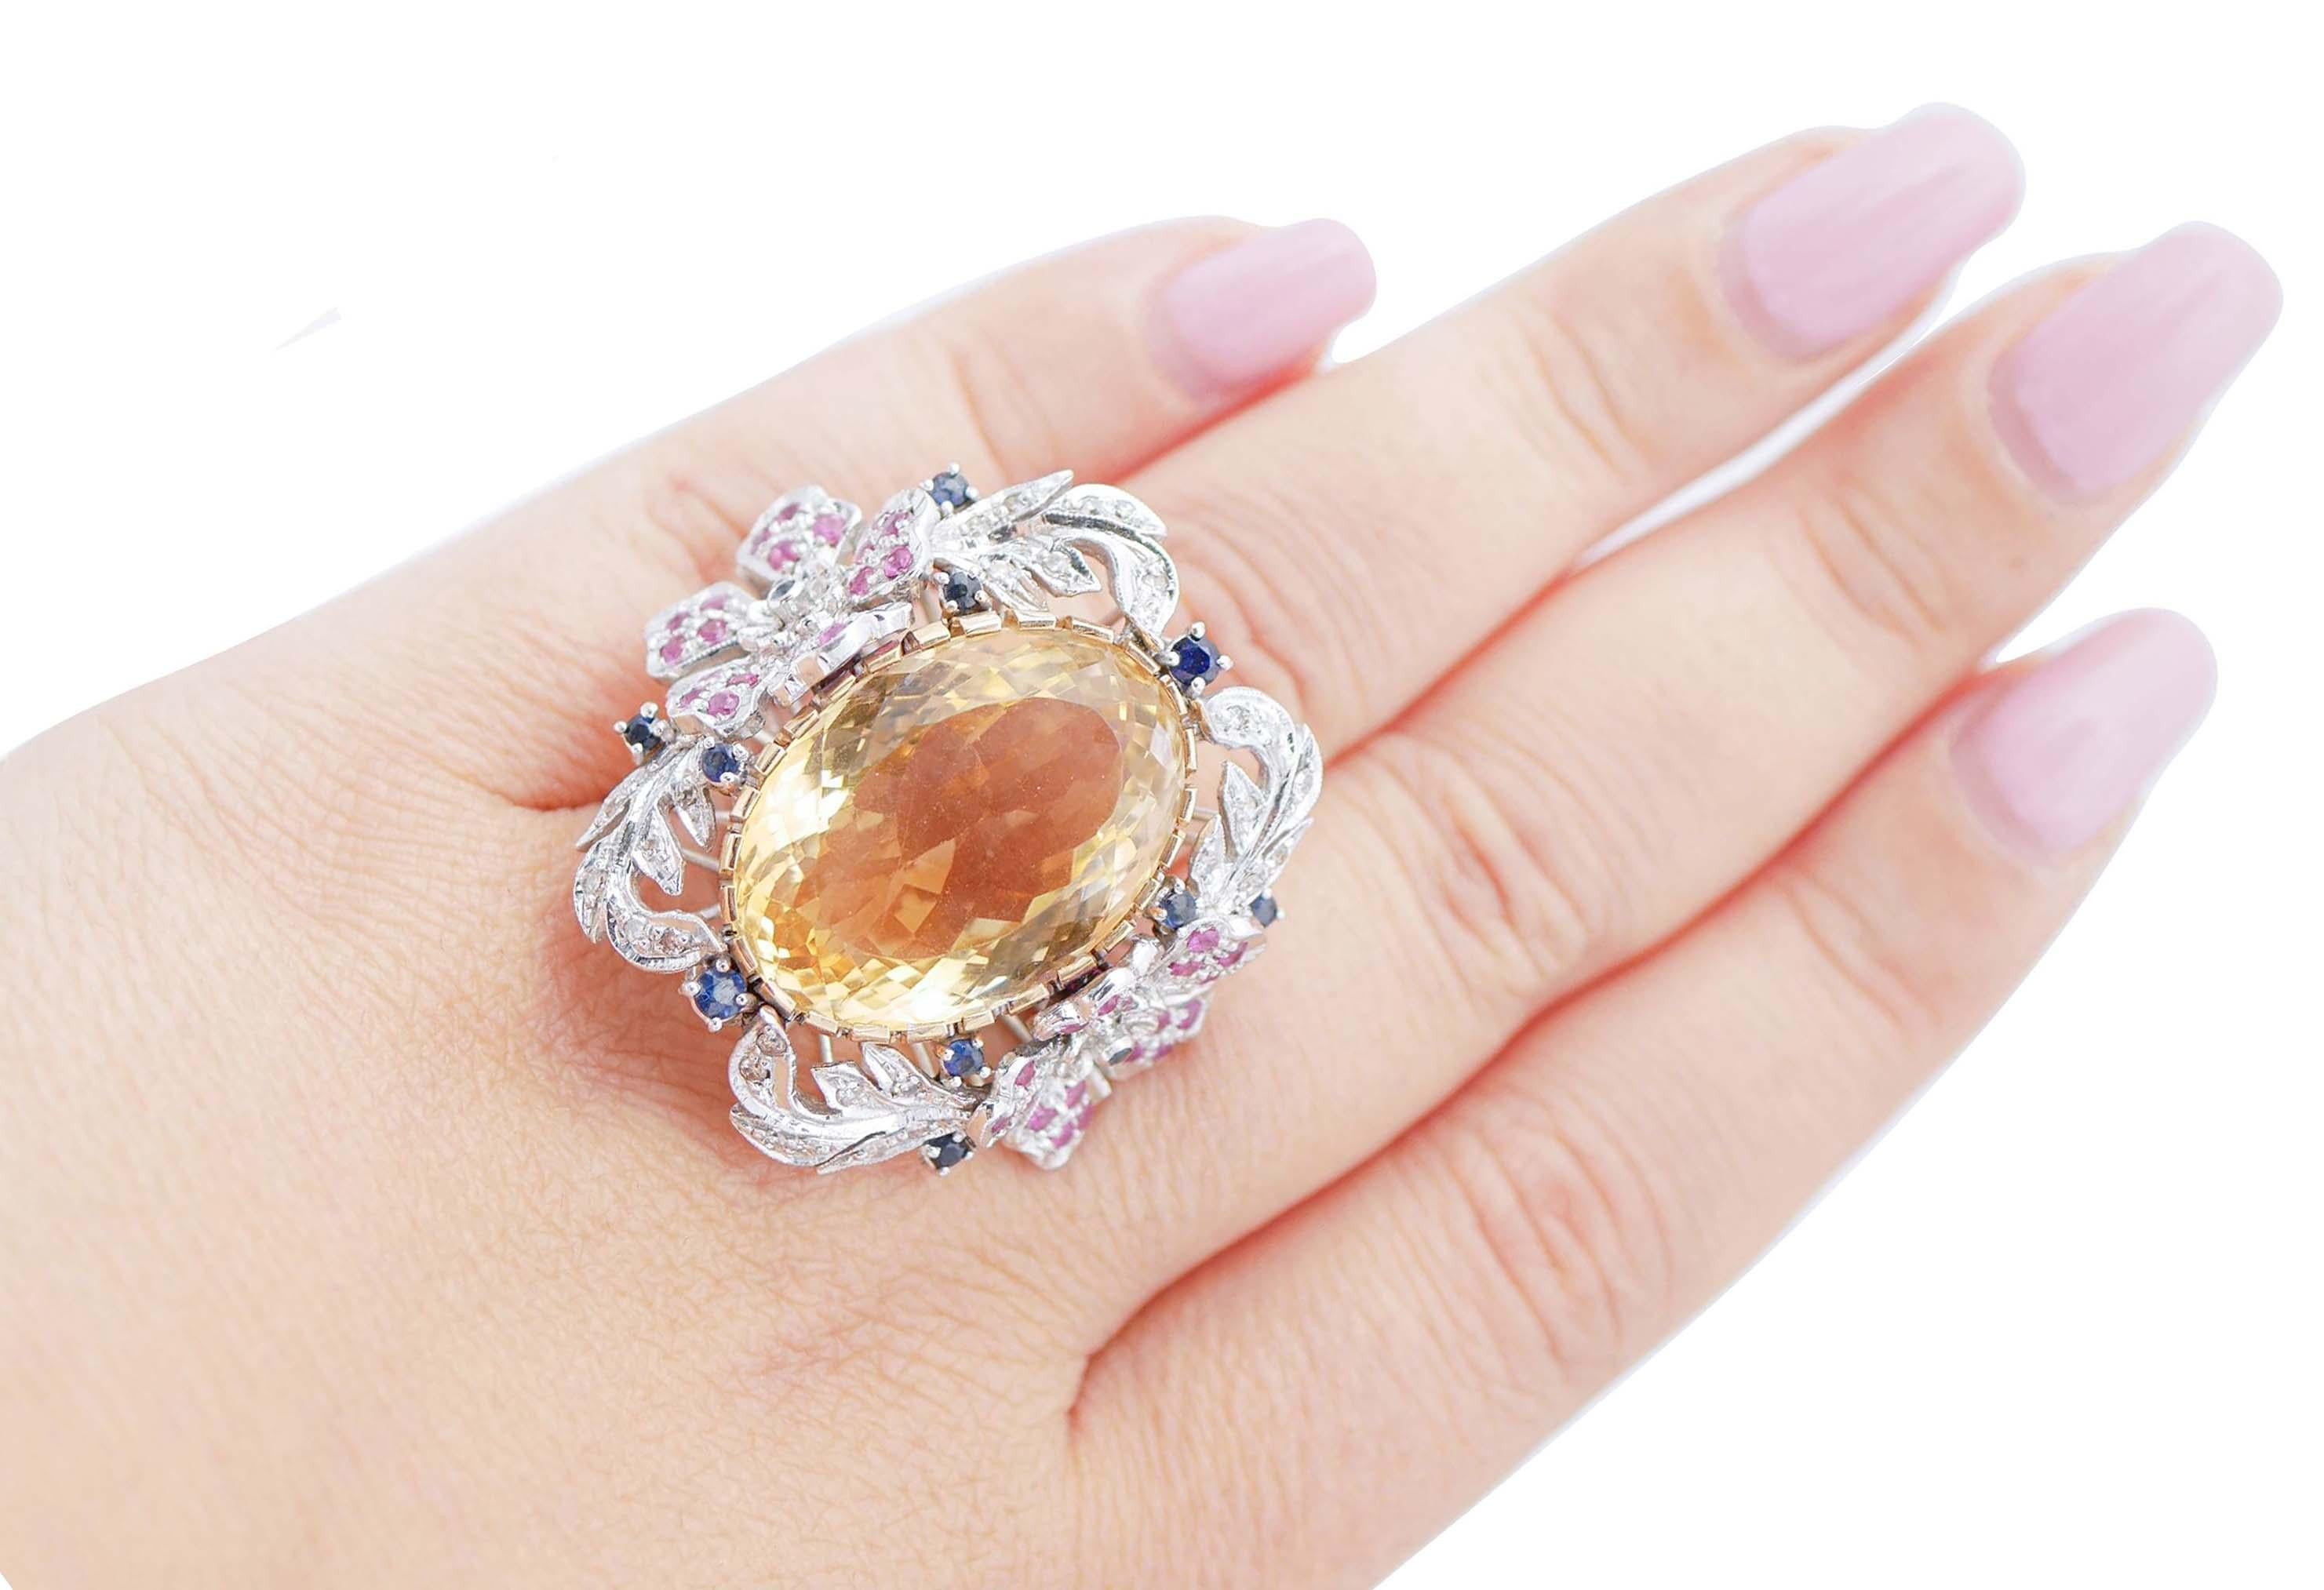 Yellow Topaz, Rubies, Sapphires, Diamonds, 14 Karat White Gold Retrò Ring In Good Condition For Sale In Marcianise, Marcianise (CE)